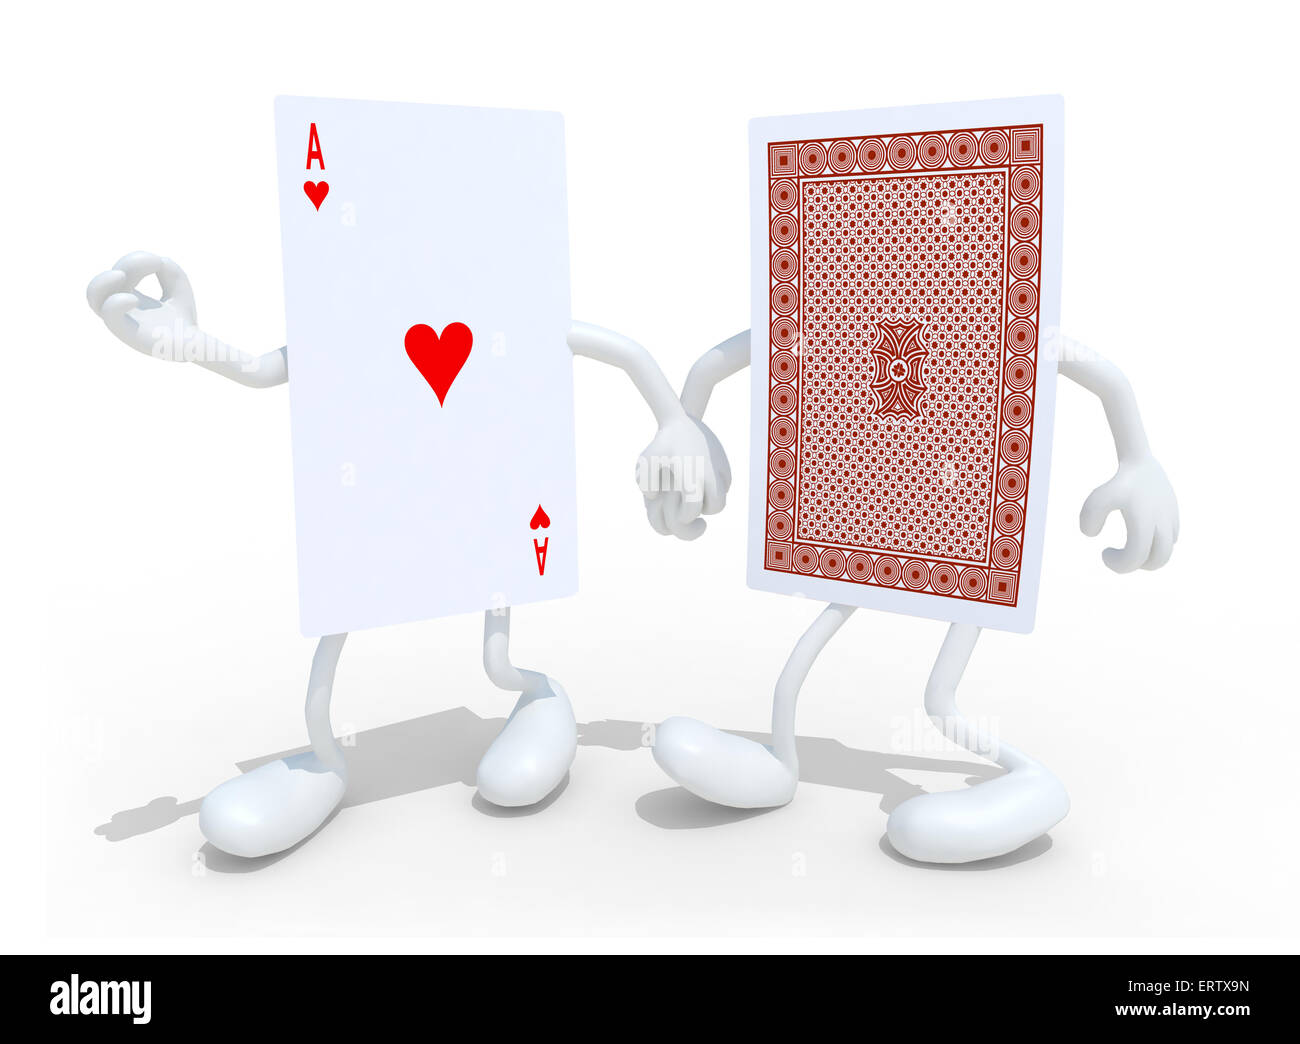 two playing card with arms and legs that walk hand in hand, isolated 3d illustration Stock Photo